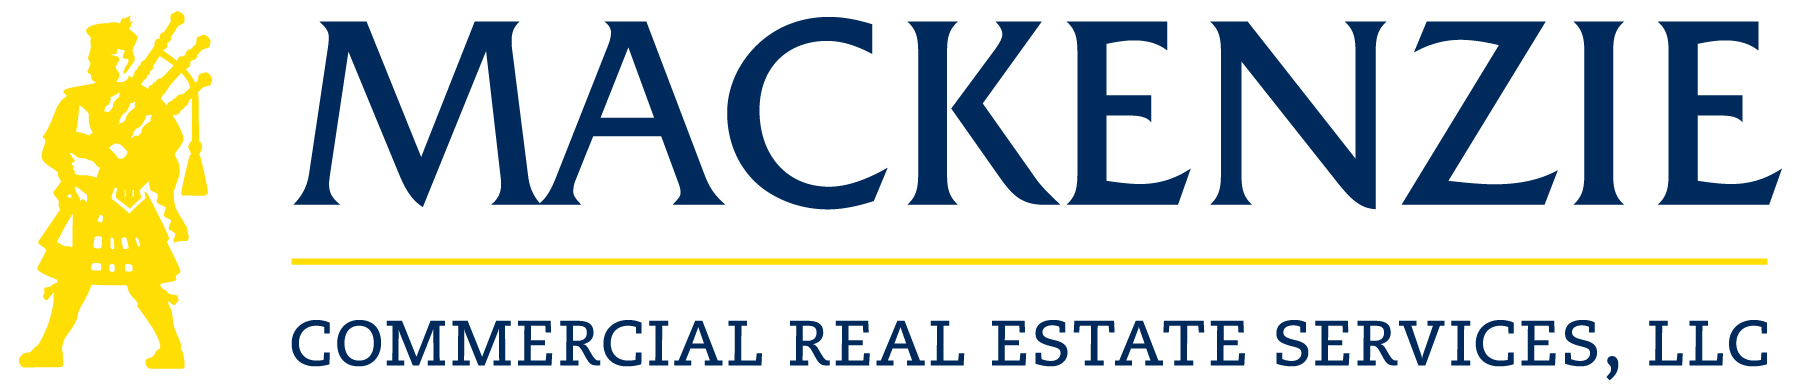 Mackenzie Commercial Real Estate Services